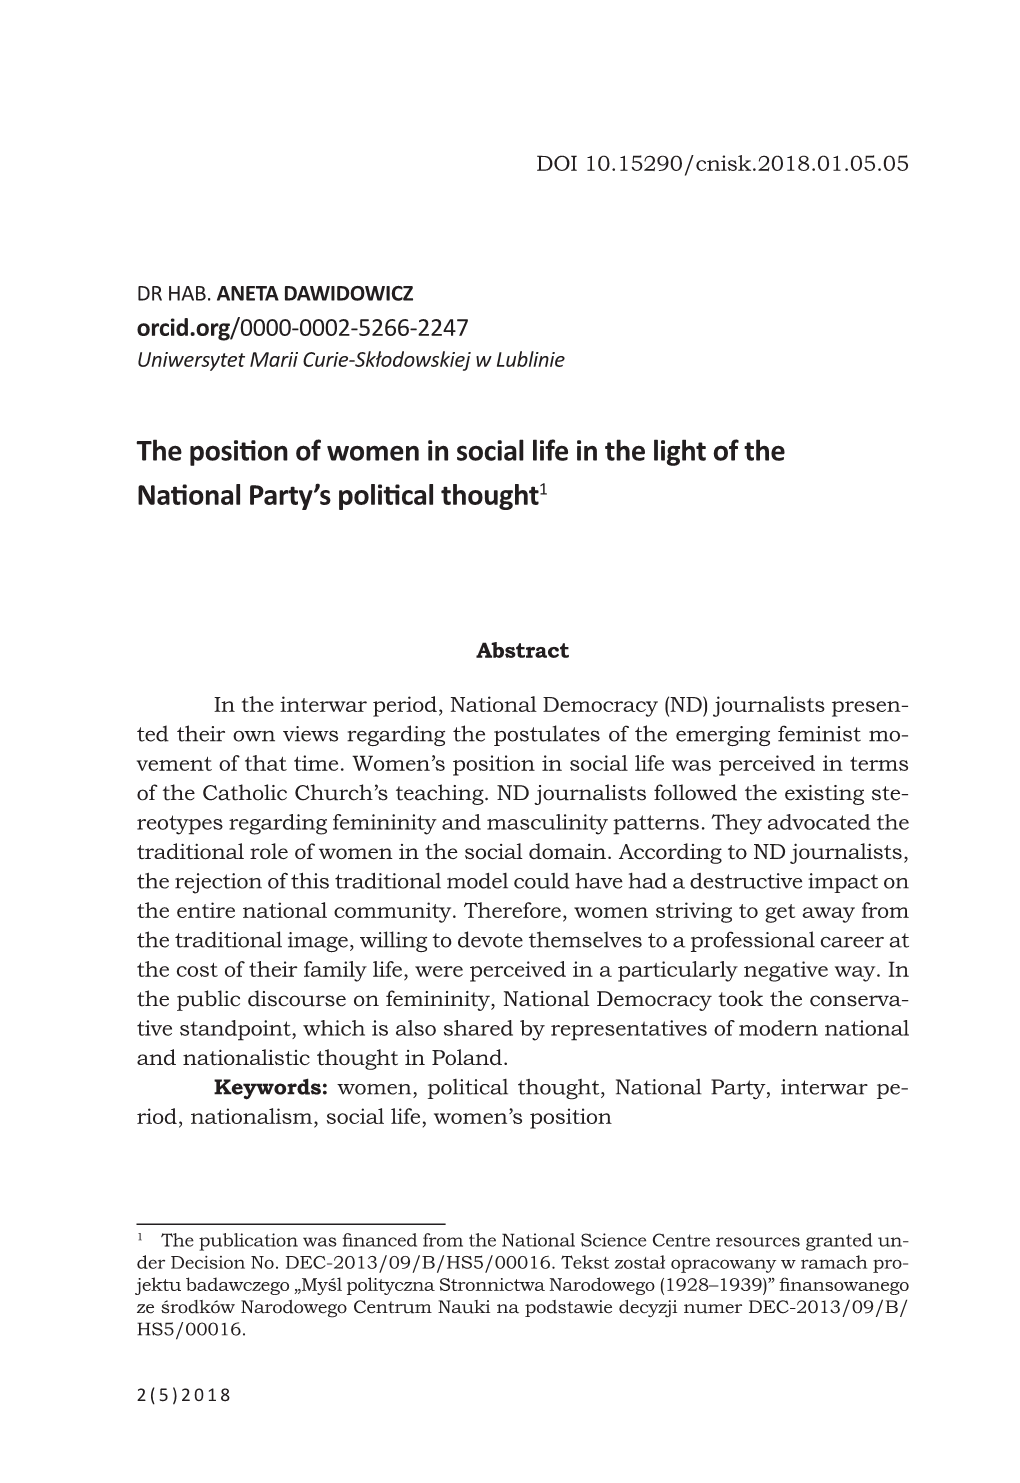 The Position of Women in Social Life in the Light of the National Party’S Political Thought1